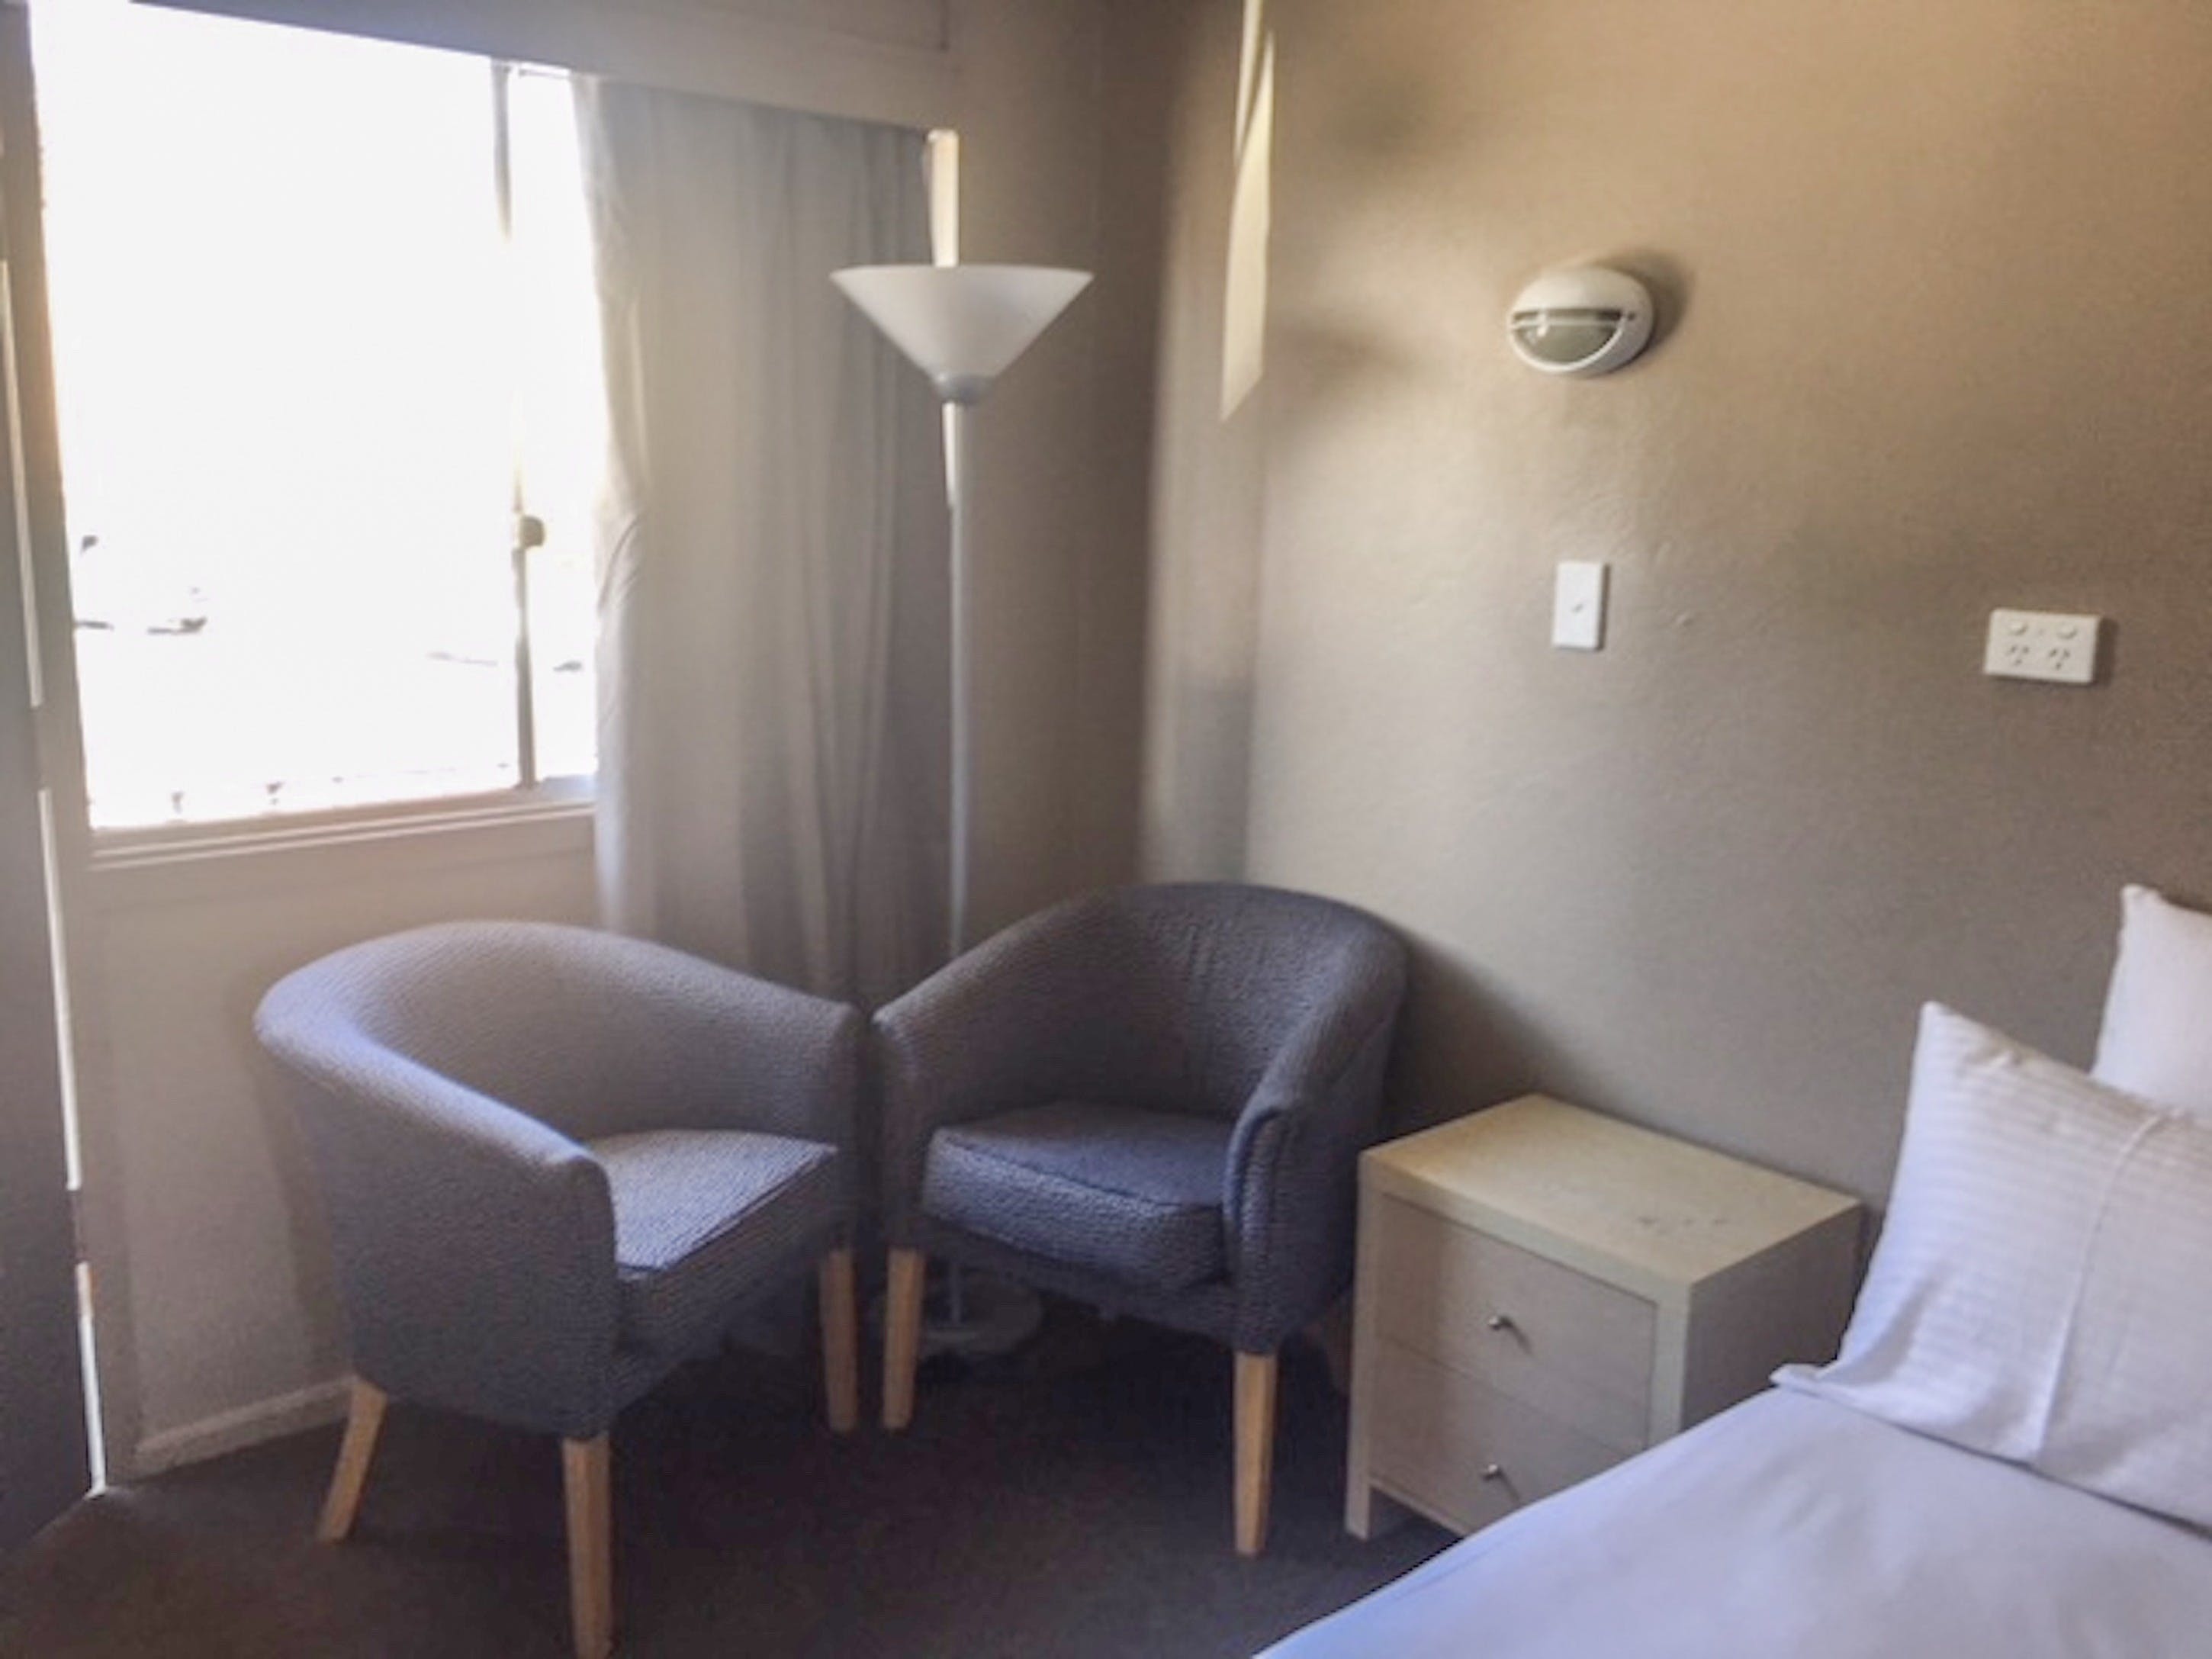 Commercial Hotel Motel Lithgow - Accommodation Sydney